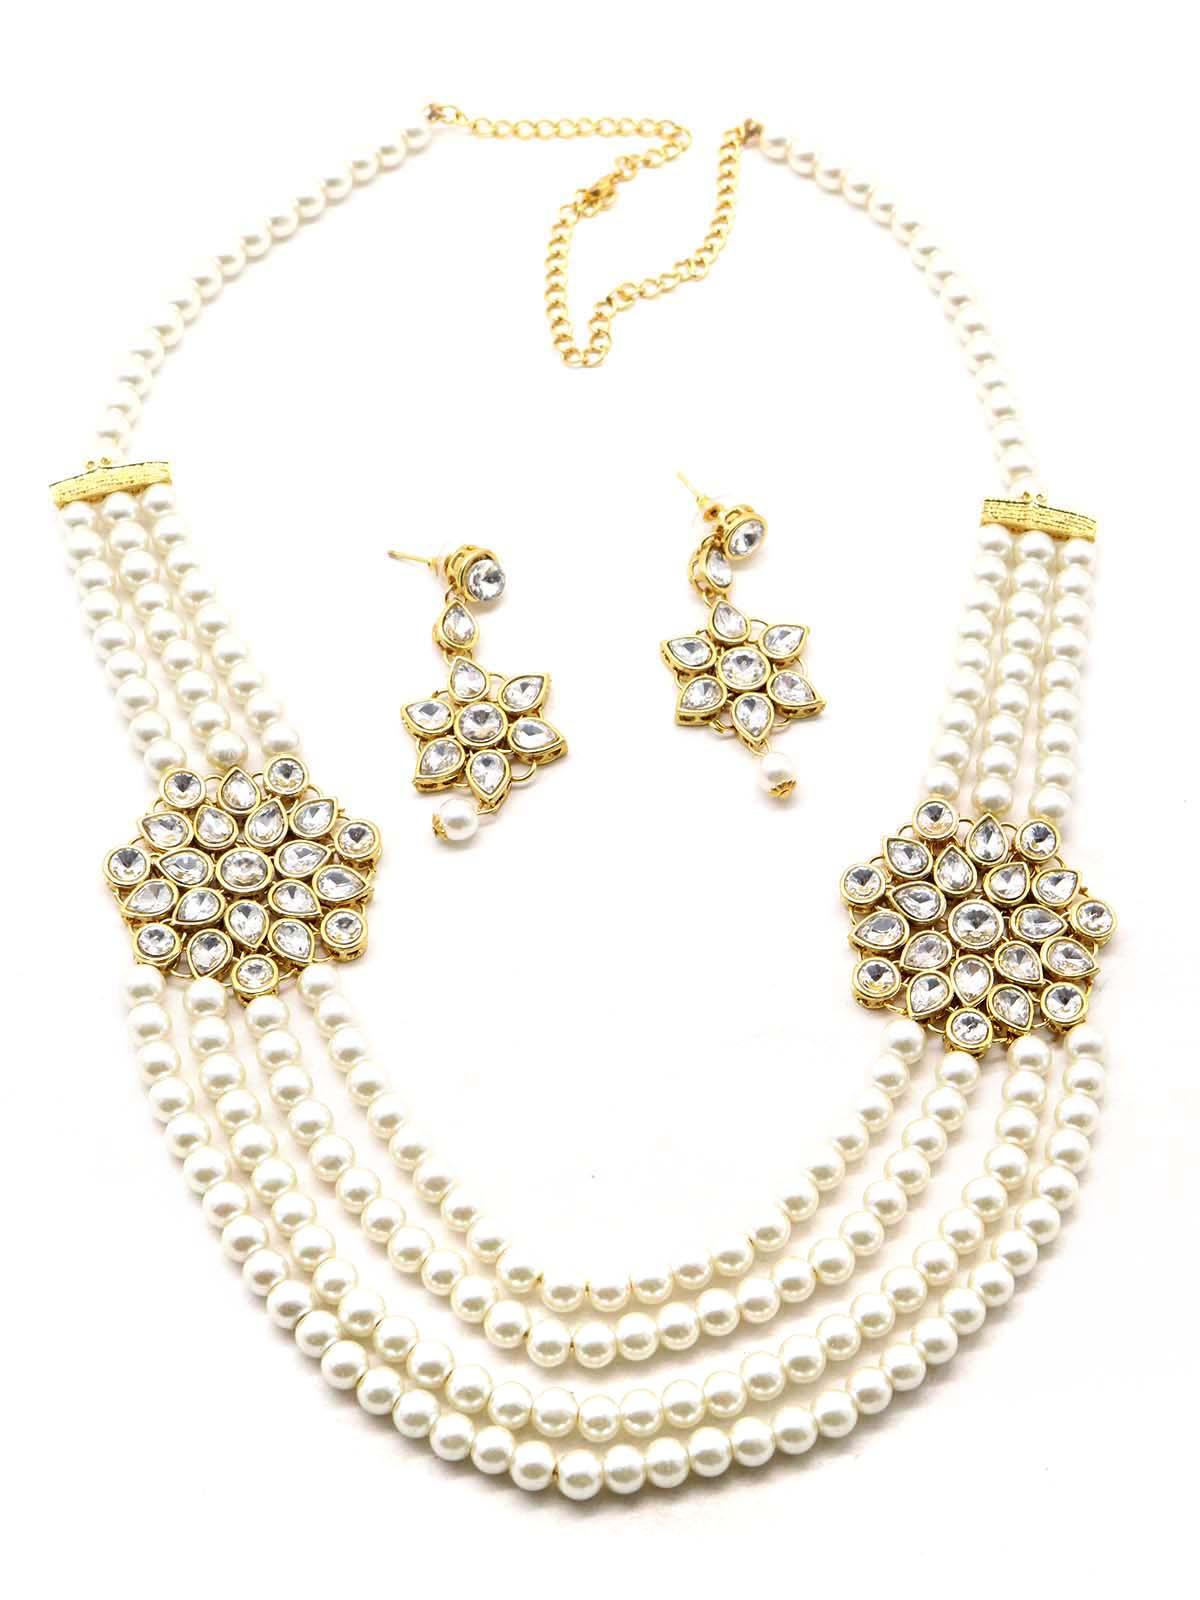 Women's Regular Attractive Faux Pearl Necklace With Earrings! - Odette